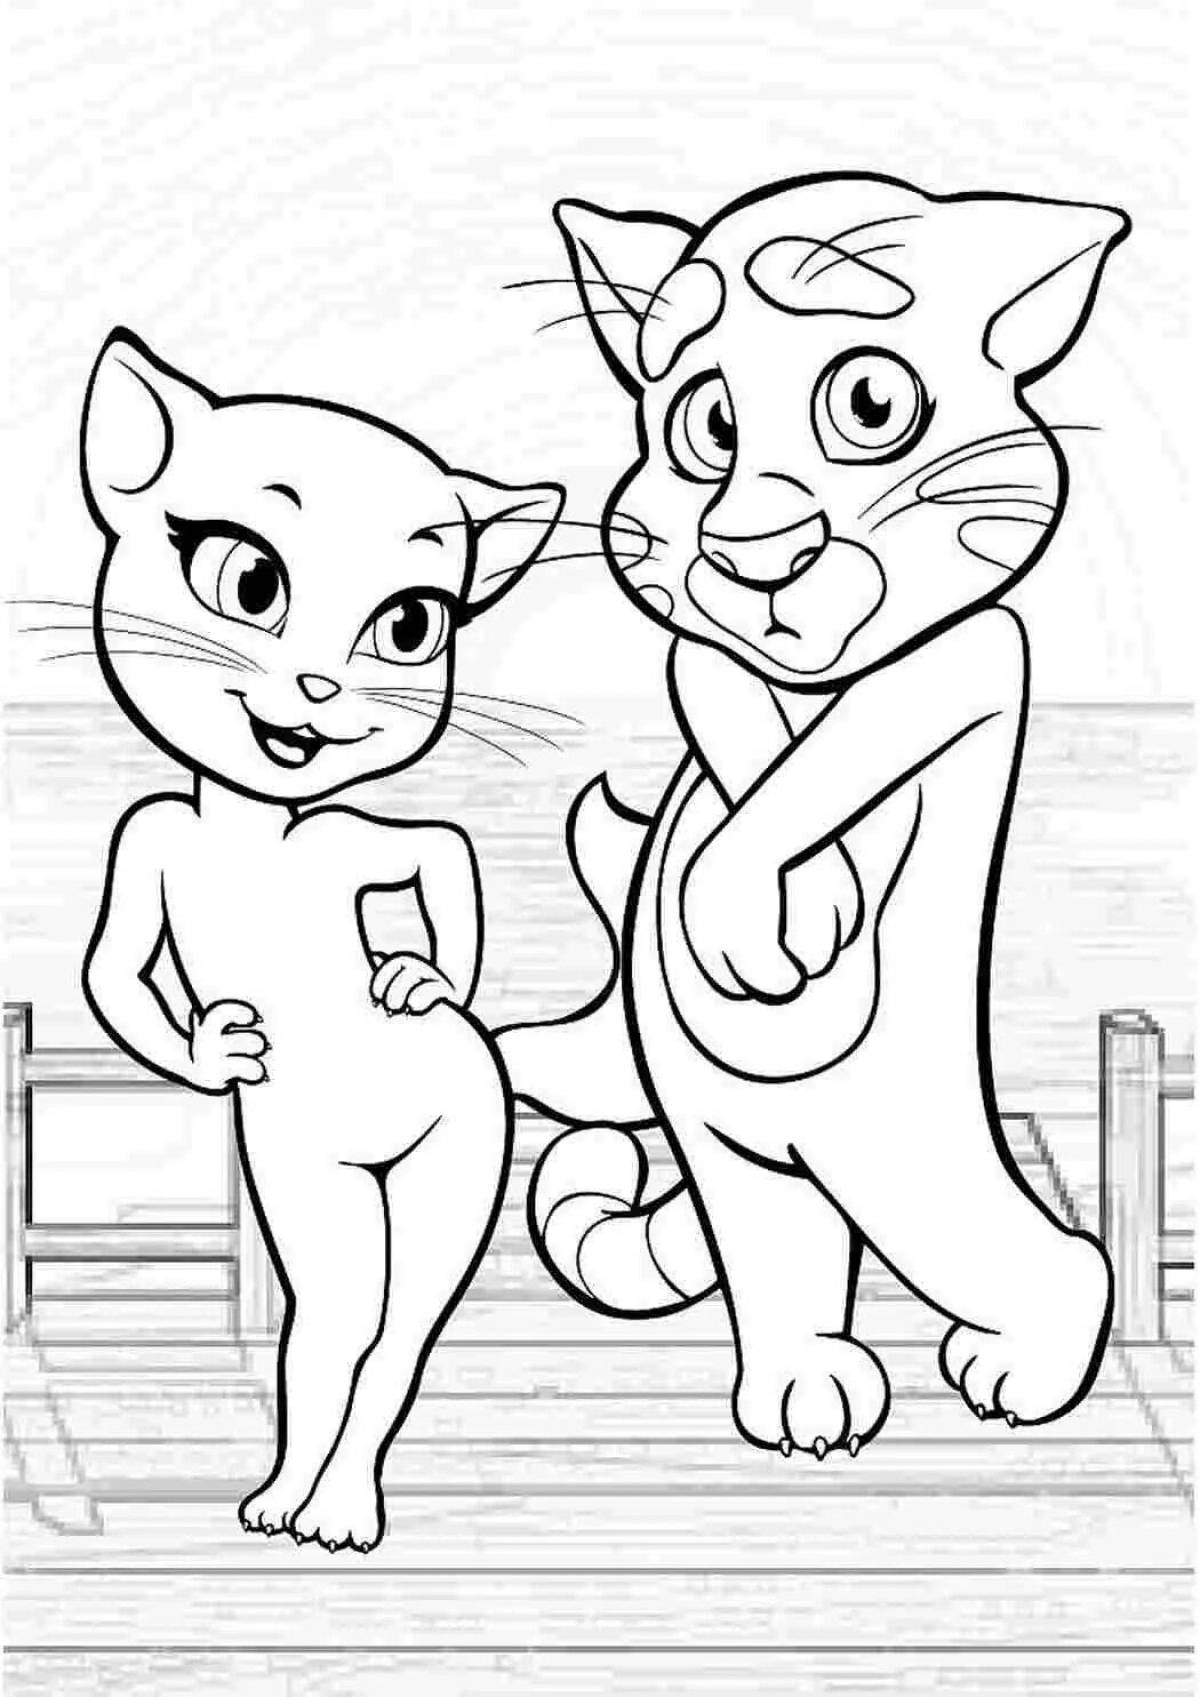 Lovely cat tom and angela coloring book